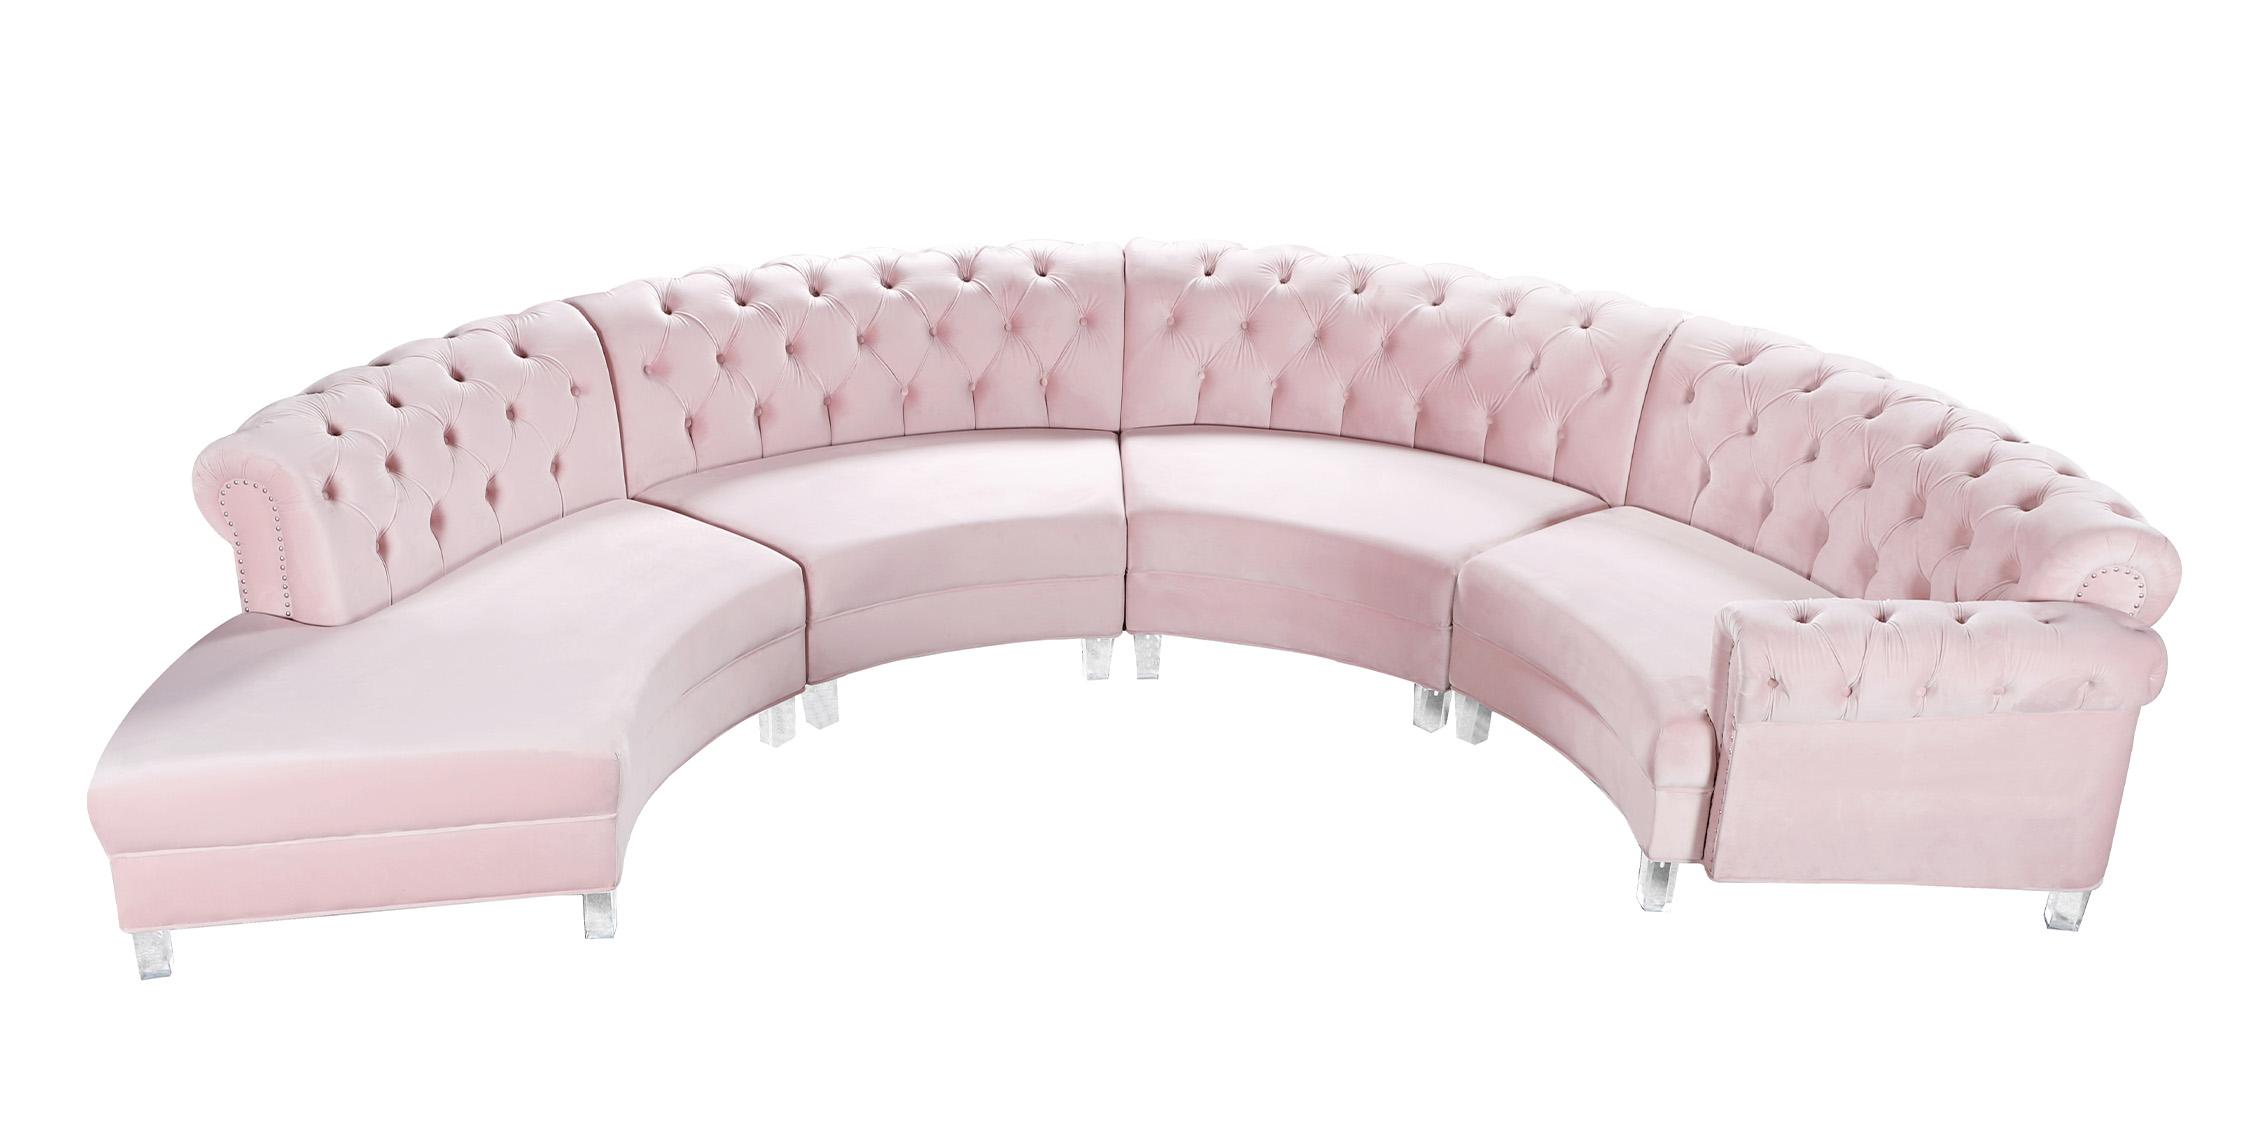 Contemporary, Modern Sectional Sofa ANABELLA 697Pink-4 697Pink-Sec-4PC in Pink Velvet